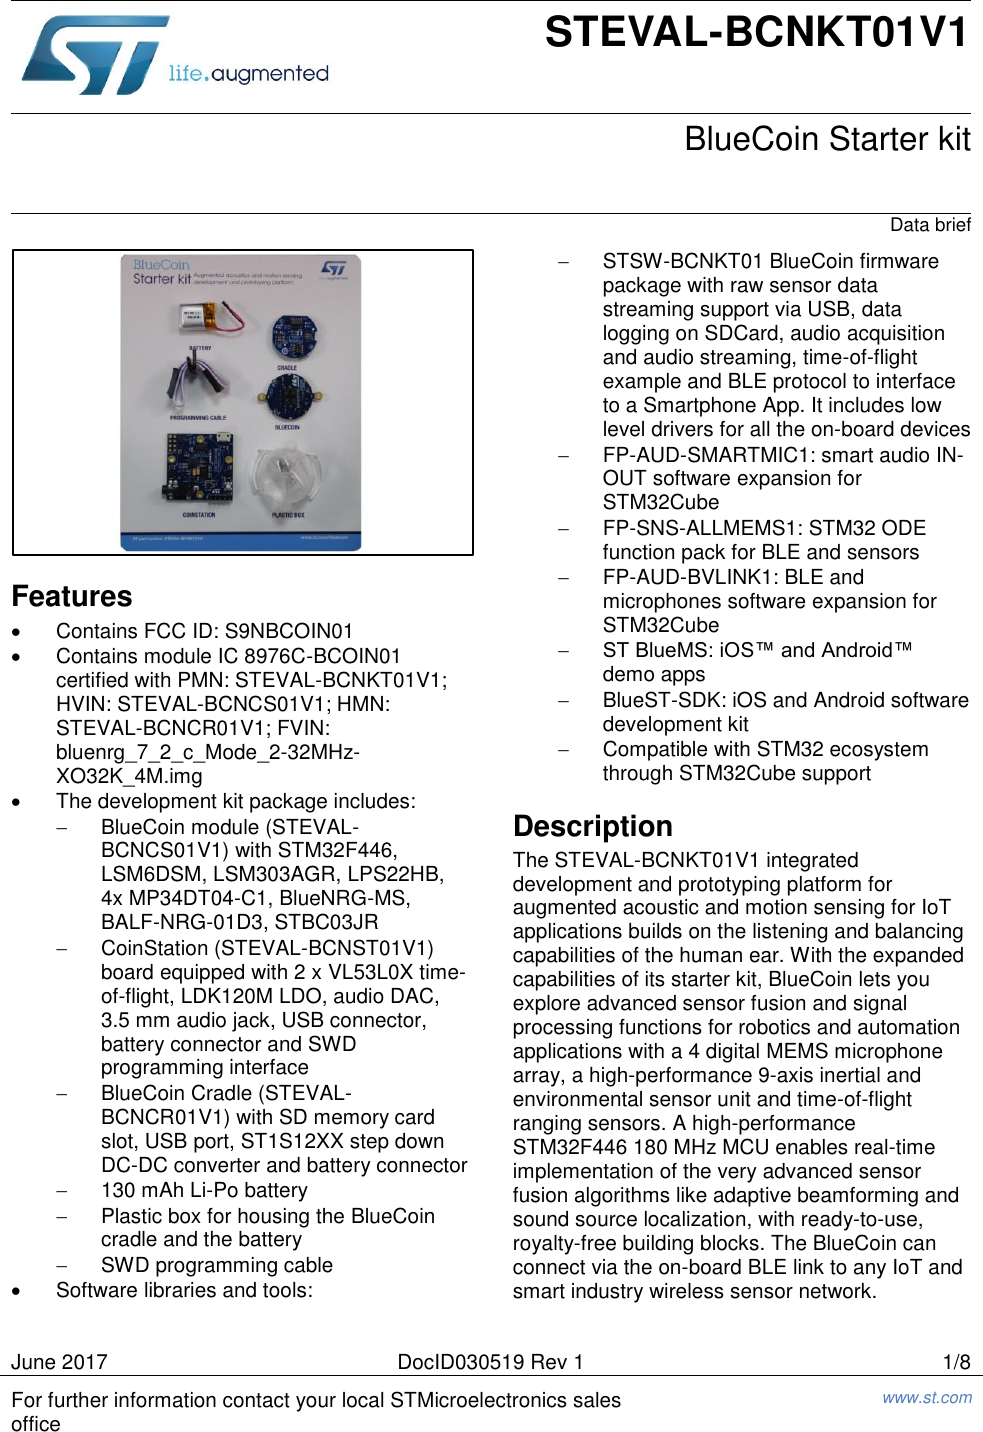   June 2017 DocID030519 Rev 1 1/8 For further information contact your local STMicroelectronics sales office www.st.com   STEVAL-BCNKT01V1  BlueCoin Starter kit Data brief  Features   Contains FCC ID: S9NBCOIN01   Contains module IC 8976C-BCOIN01 certified with PMN: STEVAL-BCNKT01V1; HVIN: STEVAL-BCNCS01V1; HMN: STEVAL-BCNCR01V1; FVIN: bluenrg_7_2_c_Mode_2-32MHz-XO32K_4M.img   The development kit package includes:   BlueCoin module (STEVAL-BCNCS01V1) with STM32F446, LSM6DSM, LSM303AGR, LPS22HB, 4x MP34DT04-C1, BlueNRG-MS, BALF-NRG-01D3, STBC03JR   CoinStation (STEVAL-BCNST01V1) board equipped with 2 x VL53L0X time-of-flight, LDK120M LDO, audio DAC, 3.5 mm audio jack, USB connector, battery connector and SWD programming interface   BlueCoin Cradle (STEVAL-BCNCR01V1) with SD memory card slot, USB port, ST1S12XX step down DC-DC converter and battery connector   130 mAh Li-Po battery   Plastic box for housing the BlueCoin cradle and the battery   SWD programming cable   Software libraries and tools:   STSW-BCNKT01 BlueCoin firmware package with raw sensor data streaming support via USB, data logging on SDCard, audio acquisition and audio streaming, time-of-flight example and BLE protocol to interface to a Smartphone App. It includes low level drivers for all the on-board devices  FP-AUD-SMARTMIC1: smart audio IN-OUT software expansion for STM32Cube  FP-SNS-ALLMEMS1: STM32 ODE function pack for BLE and sensors  FP-AUD-BVLINK1: BLE and microphones software expansion for STM32Cube  ST BlueMS: iOS™ and Android™ demo apps   BlueST-SDK: iOS and Android software development kit   Compatible with STM32 ecosystem through STM32Cube support Description The STEVAL-BCNKT01V1 integrated development and prototyping platform for augmented acoustic and motion sensing for IoT applications builds on the listening and balancing capabilities of the human ear. With the expanded capabilities of its starter kit, BlueCoin lets you explore advanced sensor fusion and signal processing functions for robotics and automation applications with a 4 digital MEMS microphone array, a high-performance 9-axis inertial and environmental sensor unit and time-of-flight ranging sensors. A high-performance STM32F446 180 MHz MCU enables real-time implementation of the very advanced sensor fusion algorithms like adaptive beamforming and sound source localization, with ready-to-use, royalty-free building blocks. The BlueCoin can connect via the on-board BLE link to any IoT and smart industry wireless sensor network.  